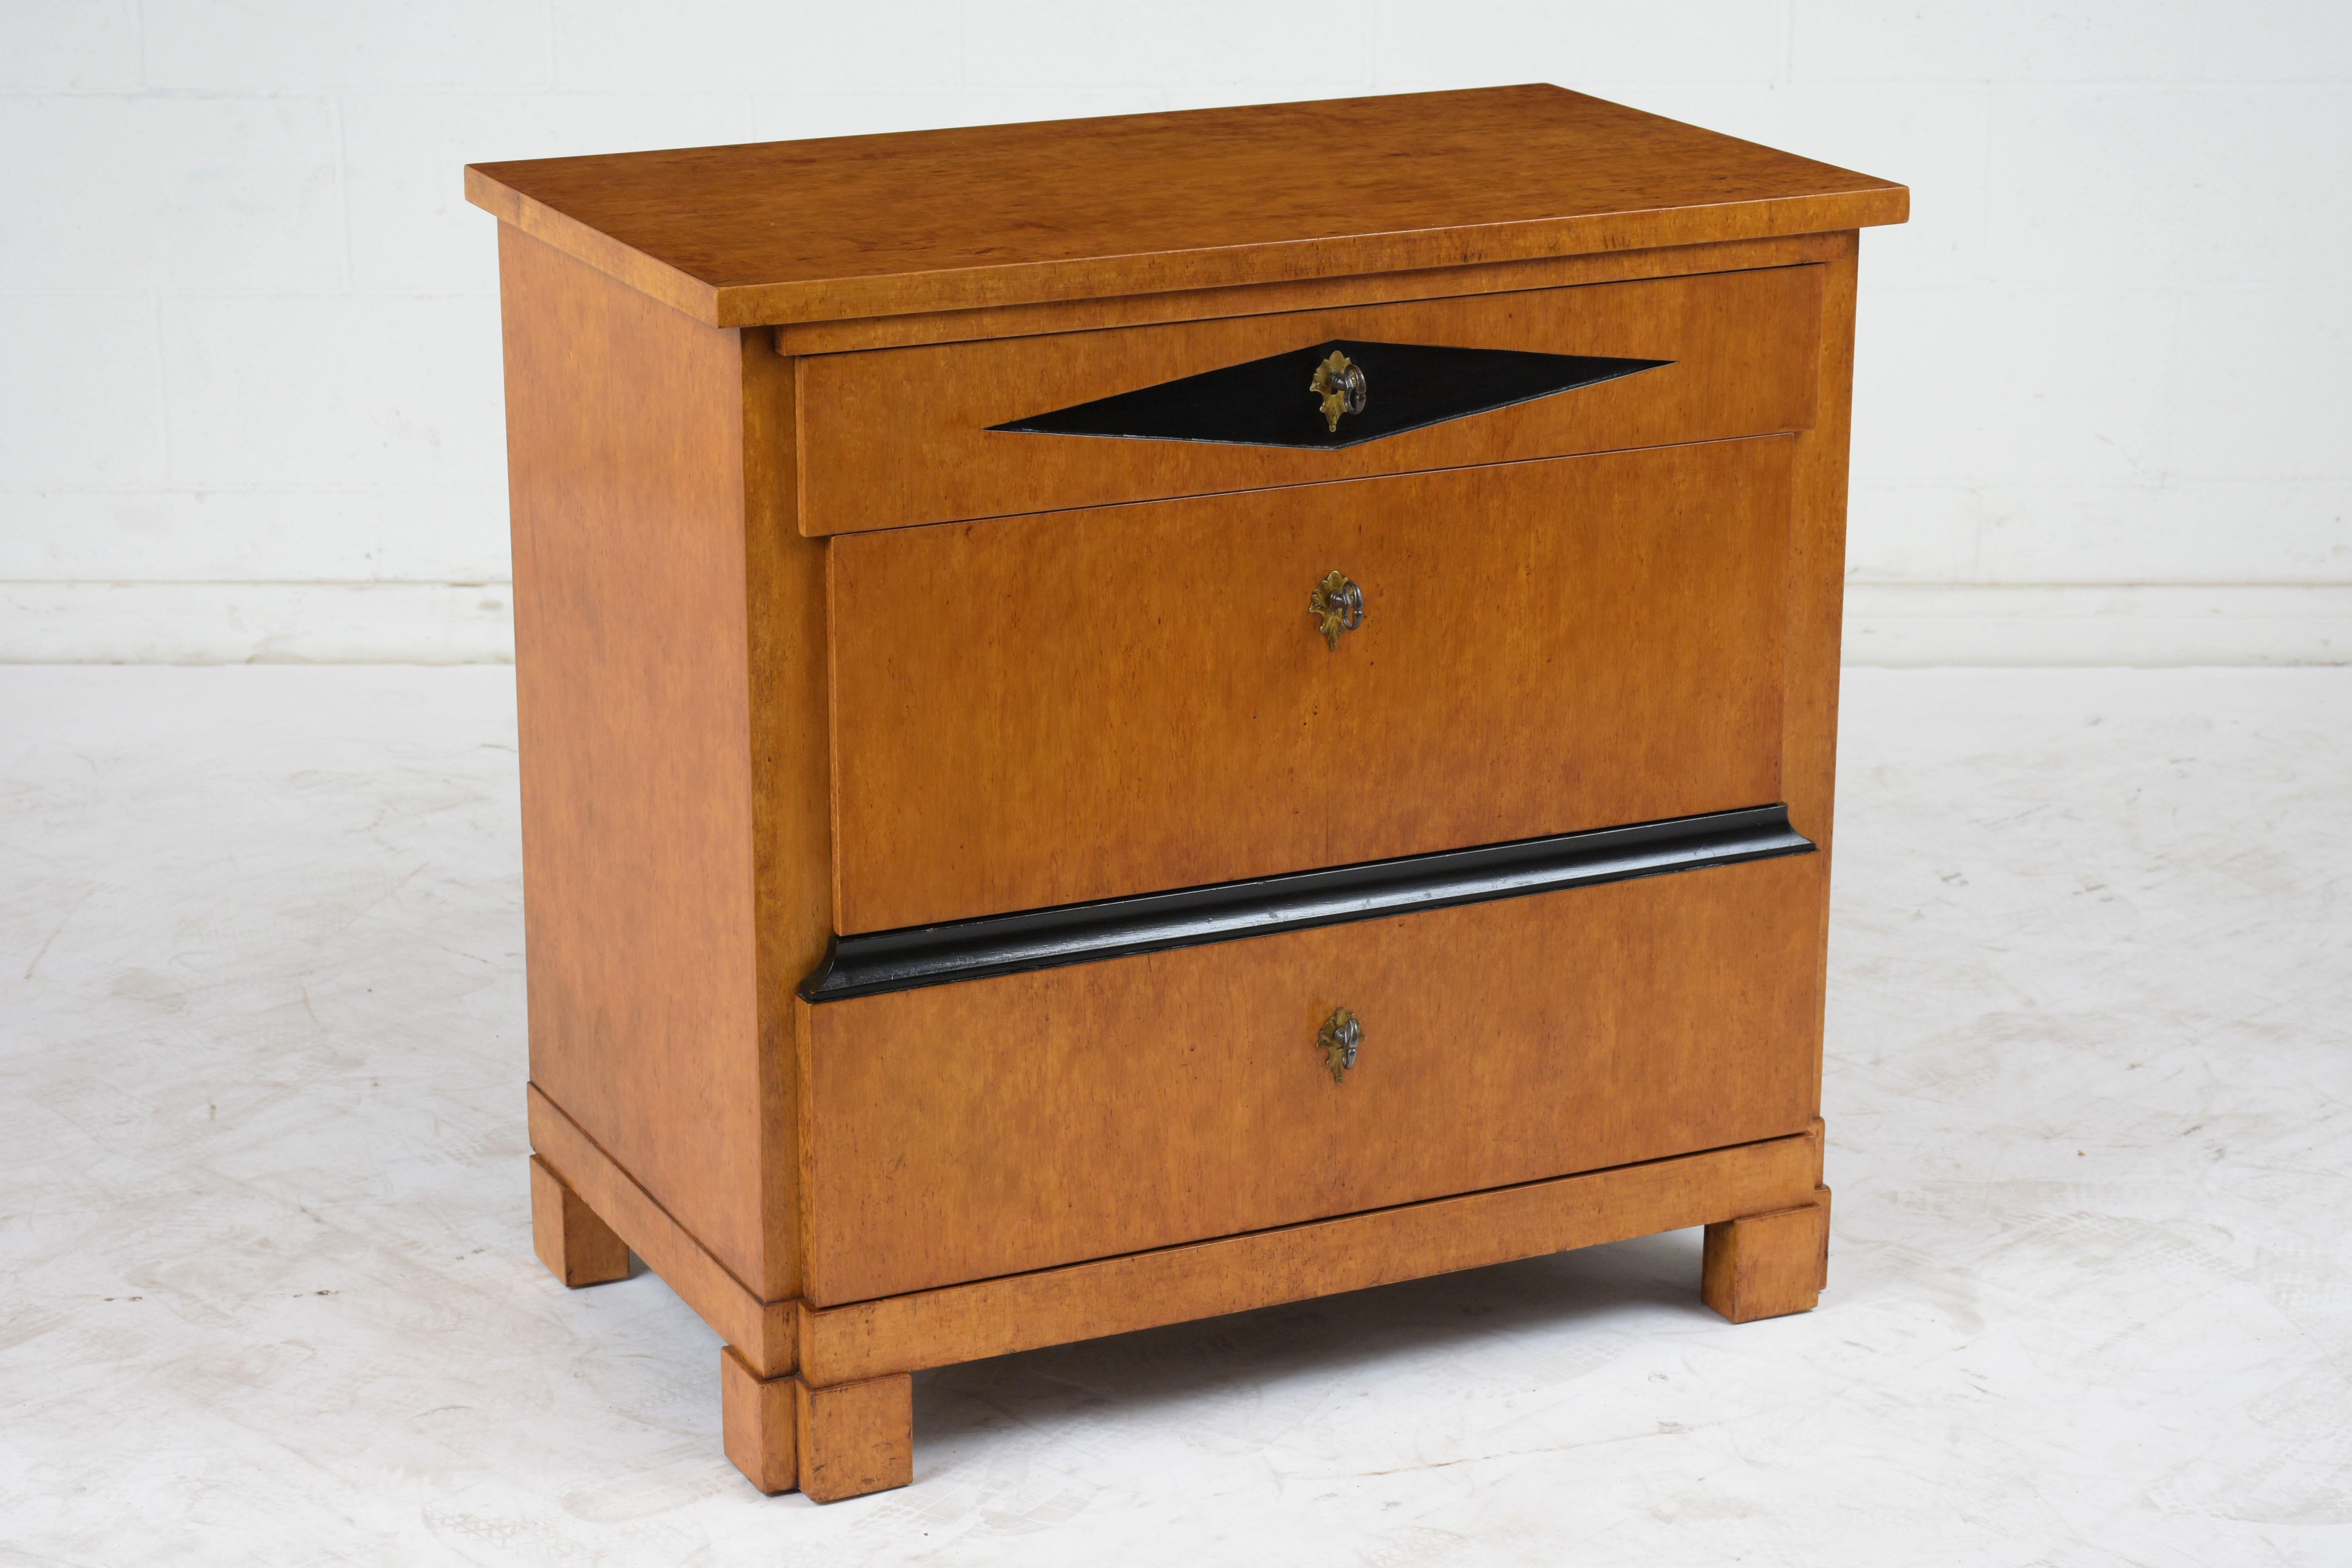 This 1930s Biedermeier-style chest of drawers is covered in birch wood veneers and finished in a light walnut color with black accents. There are three drawers with carved notches for opening and keyhole plates. The drawers are lined in silk with